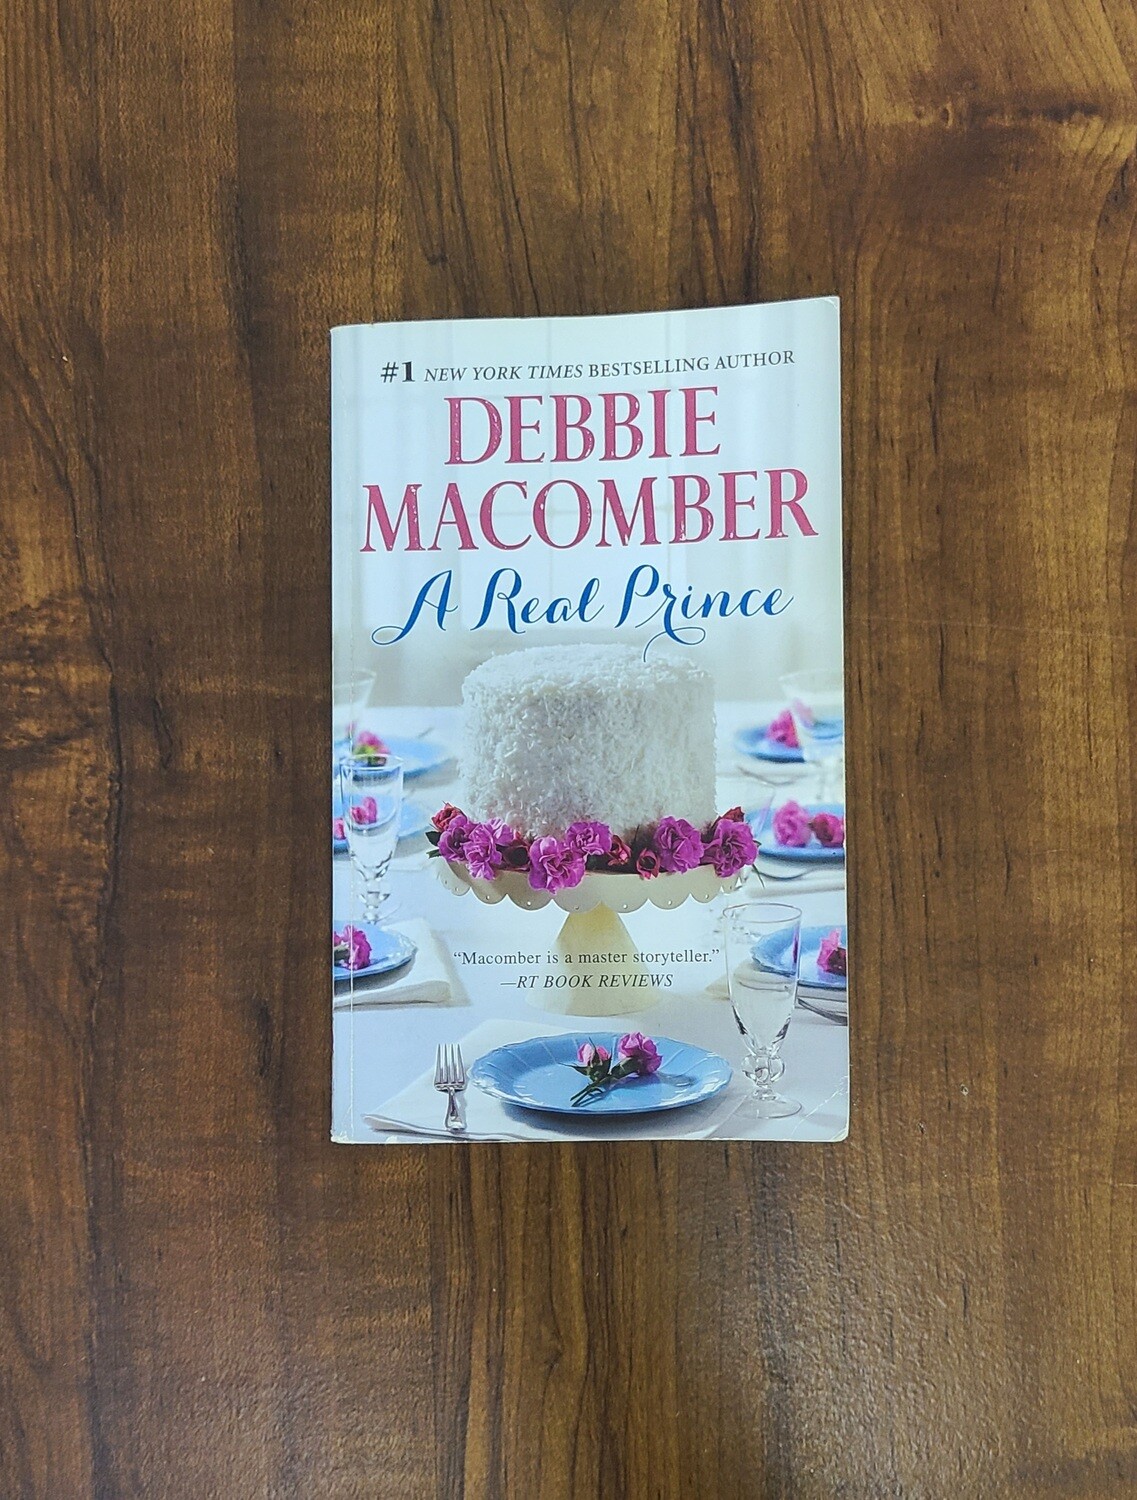 A Real Prince by Debbie Macomber